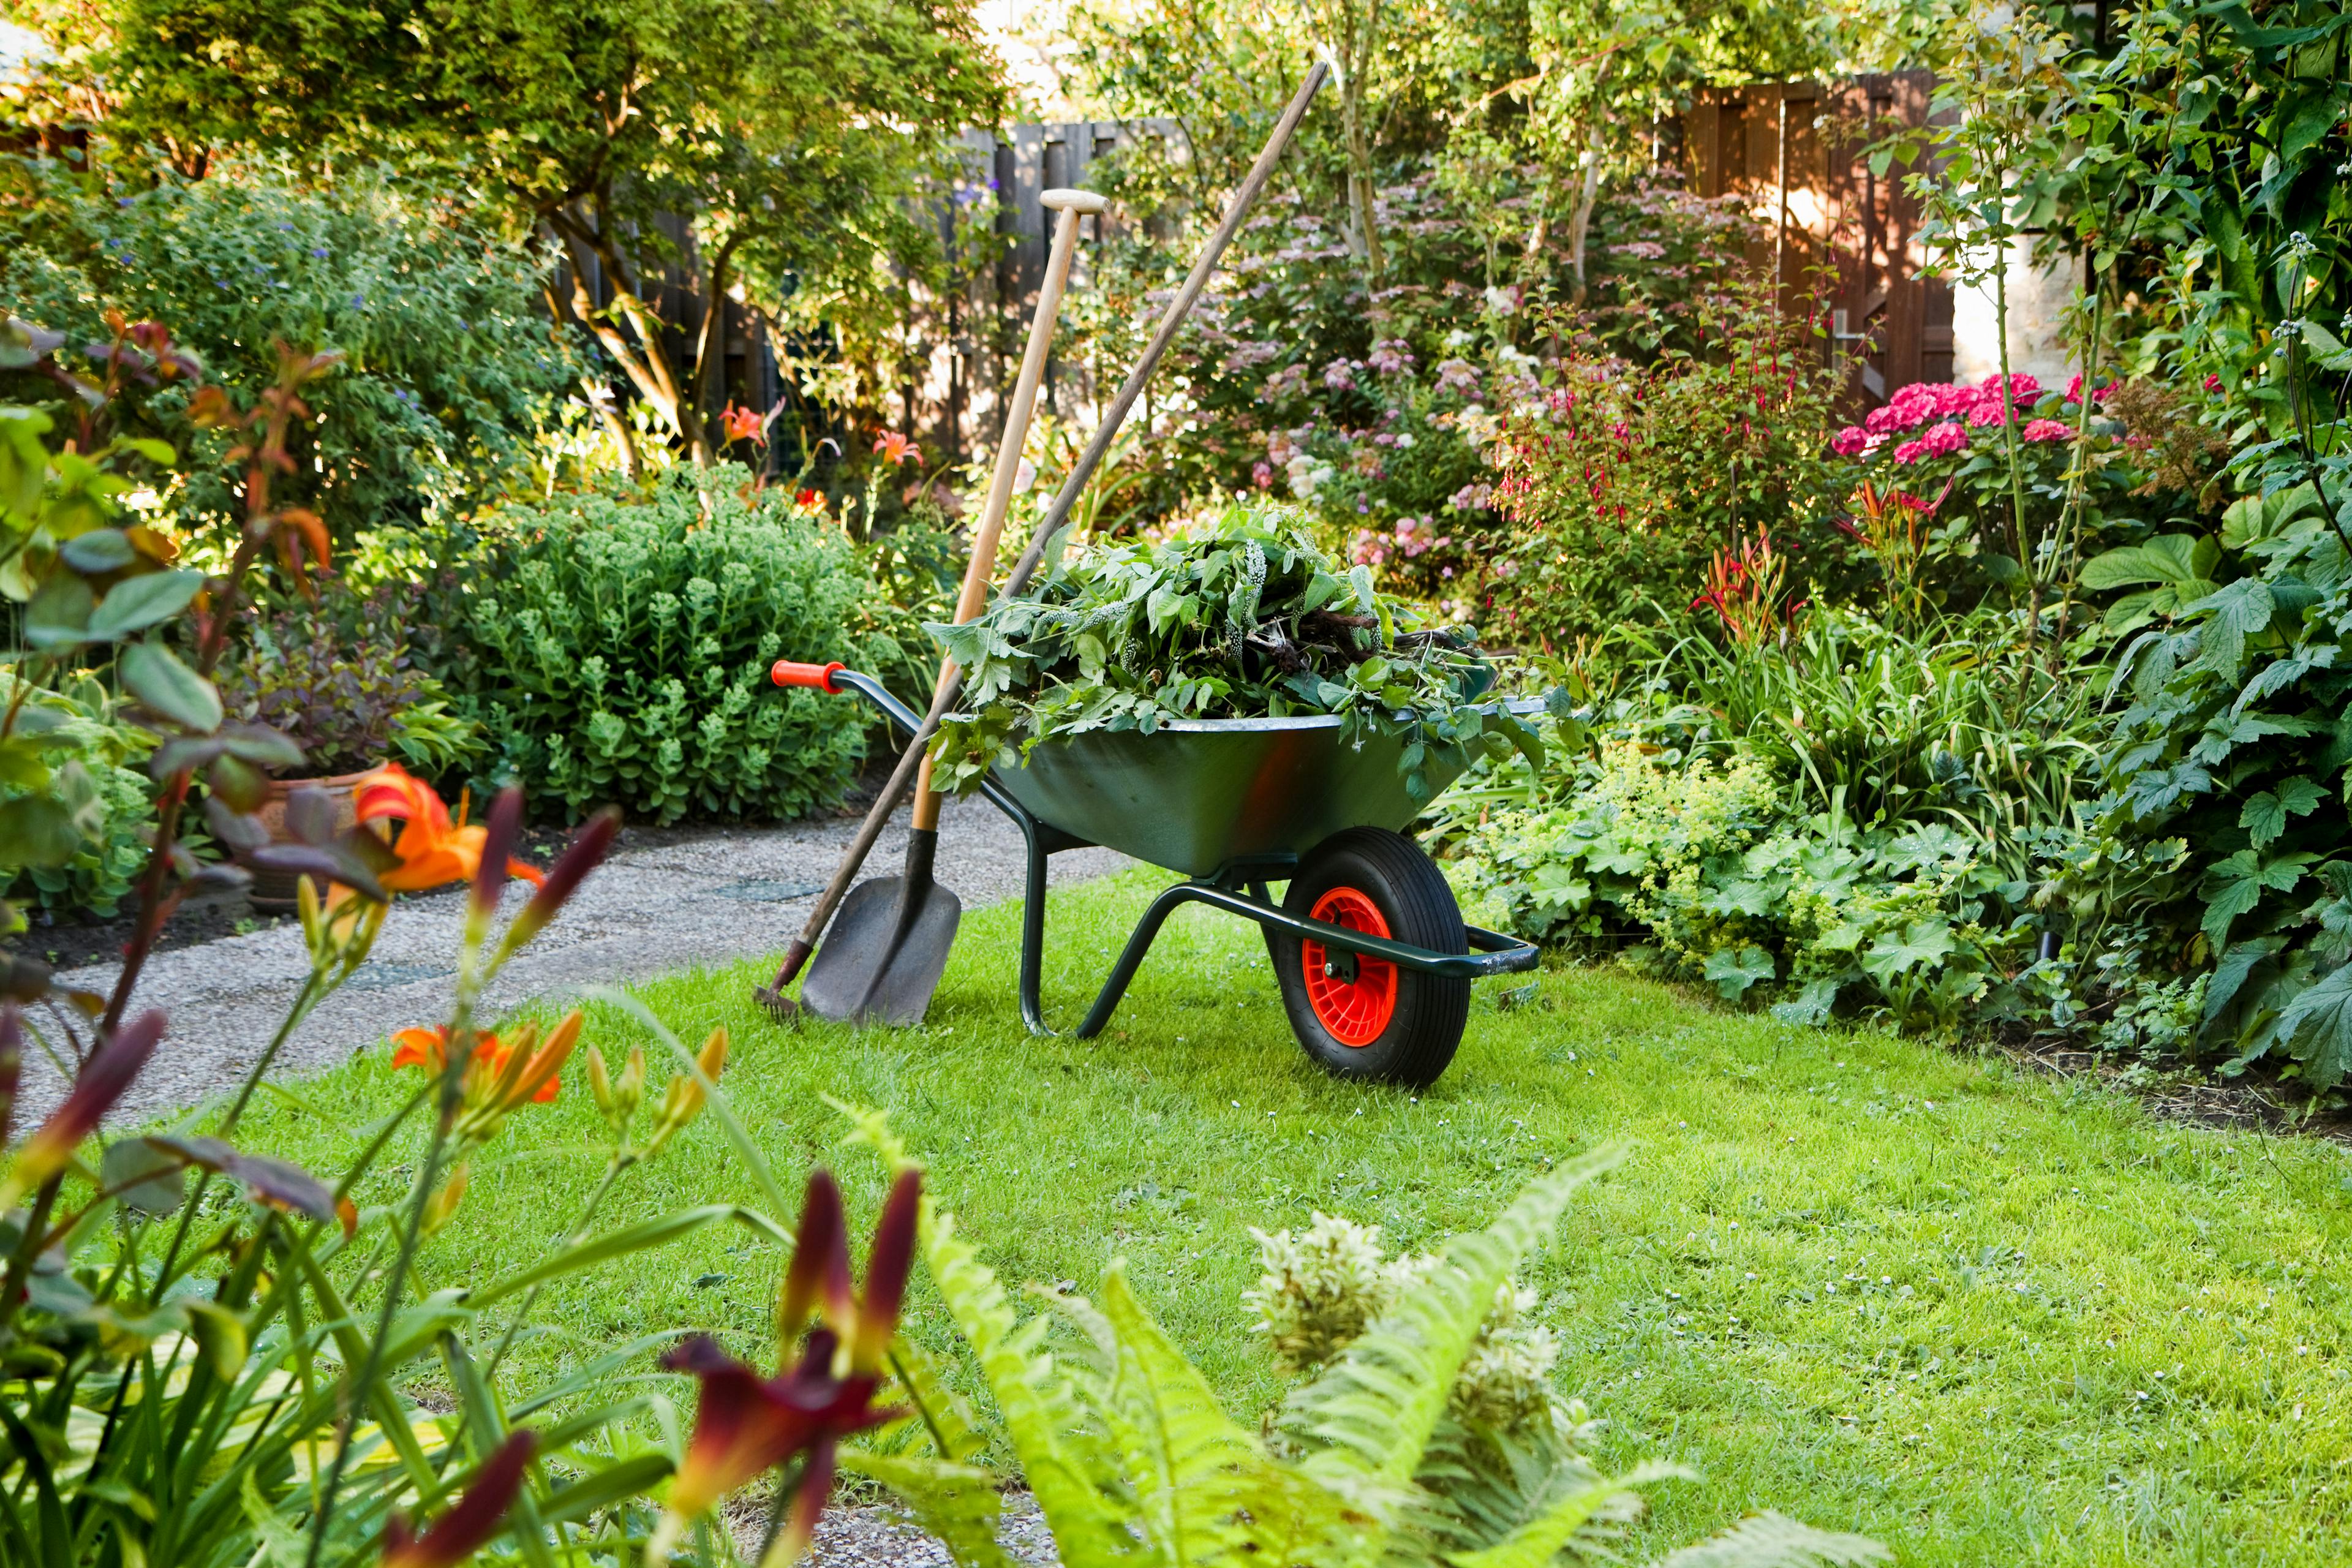 A bucolic garden with a well manicured lawn hosts a wheelbarrow with trimmings and a shovel and rake lean against it